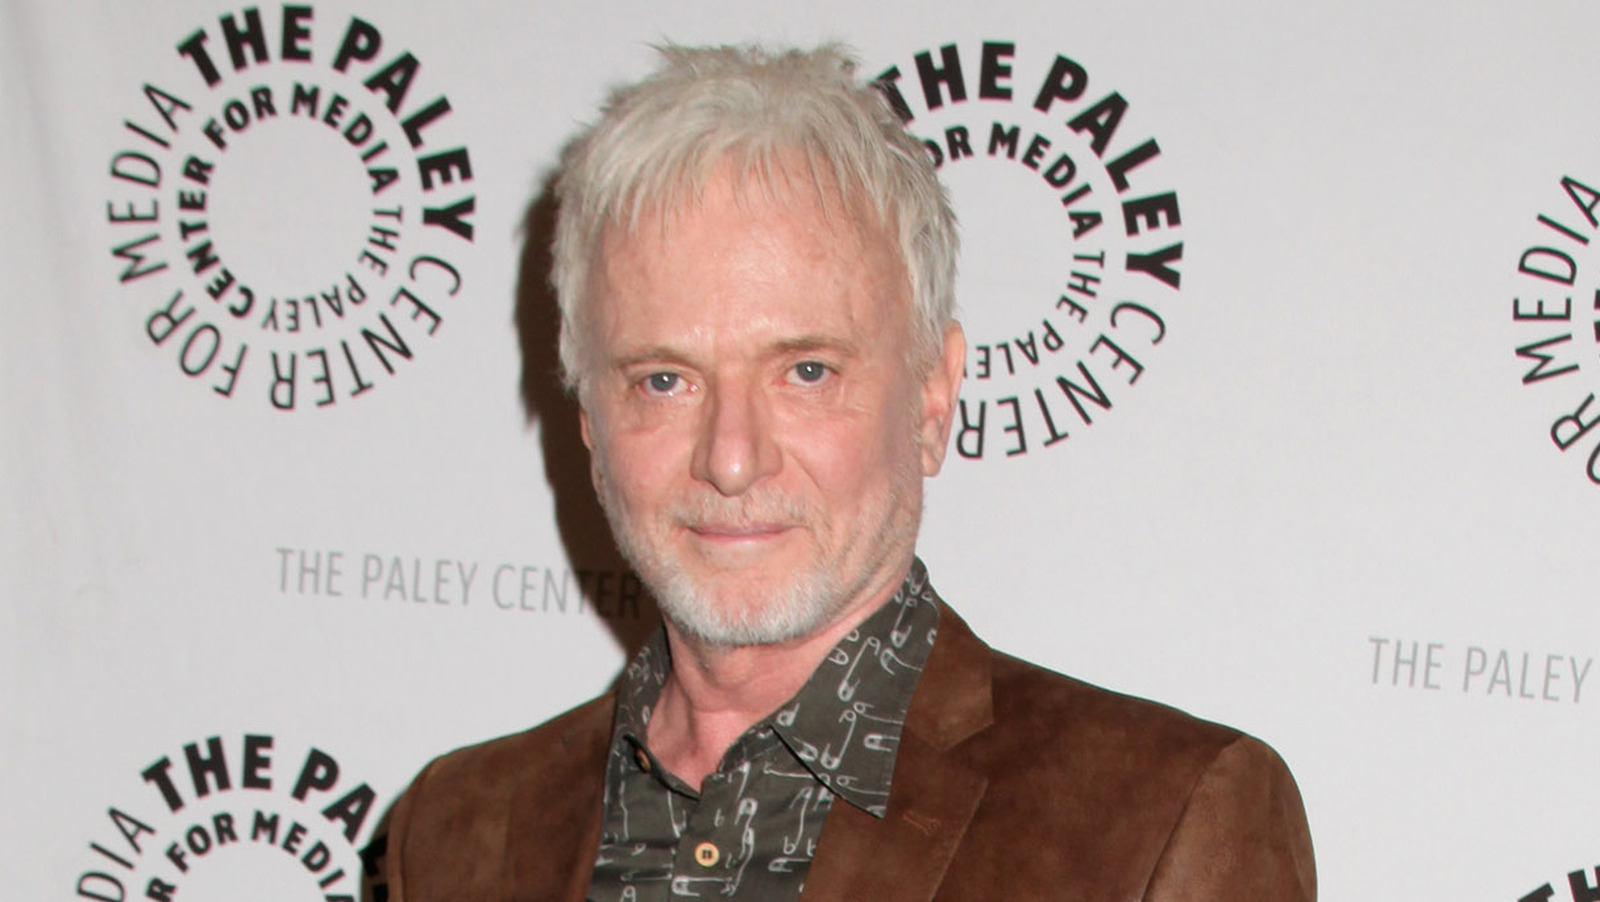 General Hospital's Tony Geary Makes His Soap Comeback (But With A Twist)